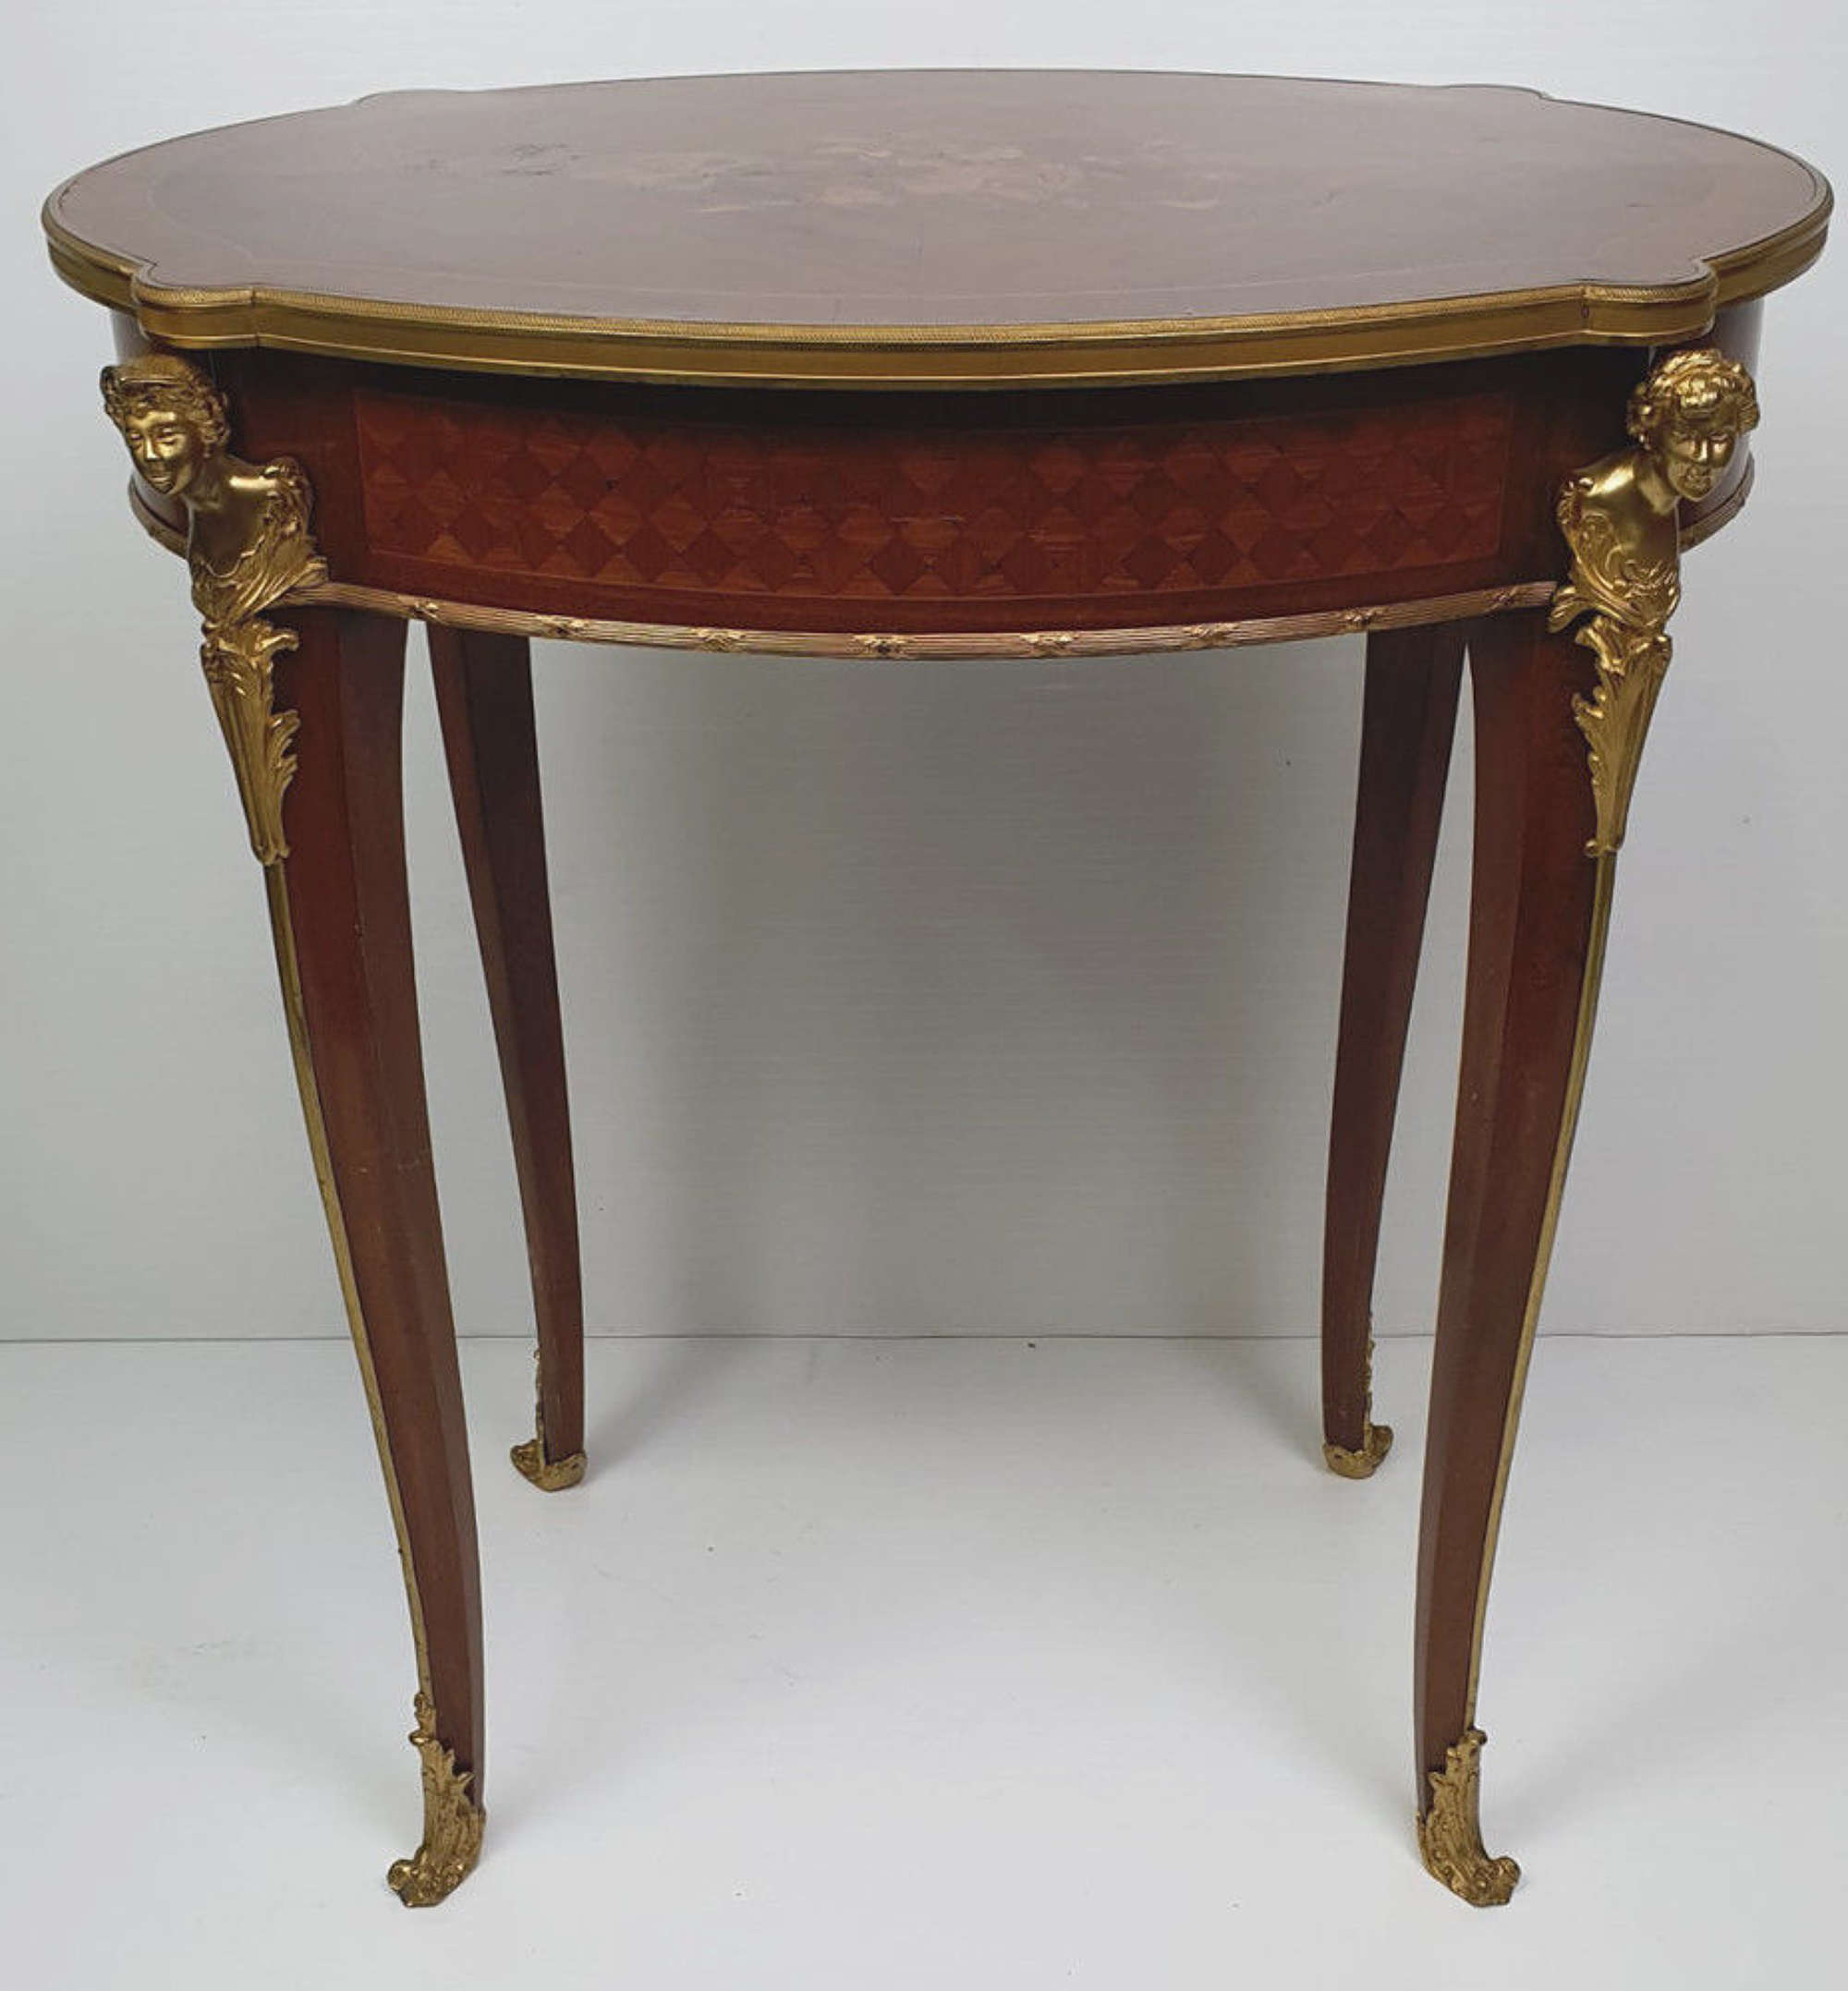 Early 20th Century Marquetry Inlaid Mahogany Table With Ormolu Mounts